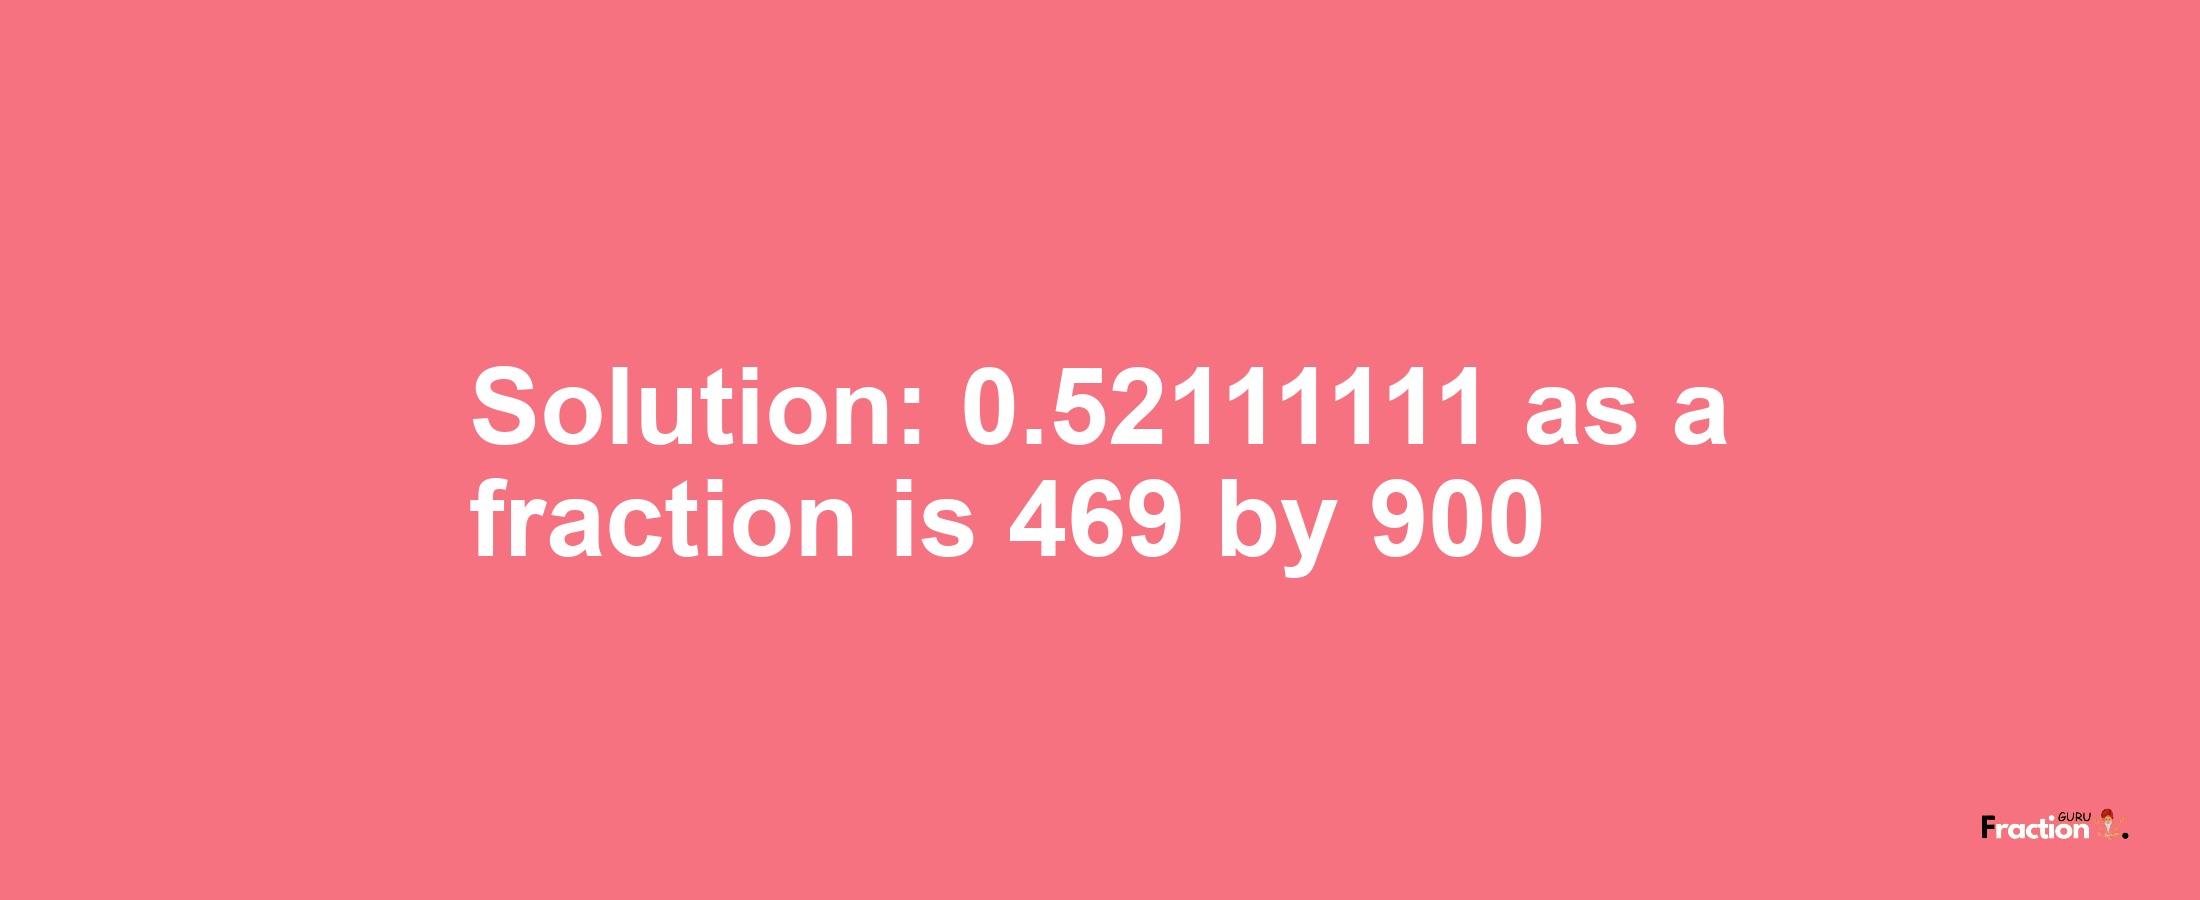 Solution:0.52111111 as a fraction is 469/900